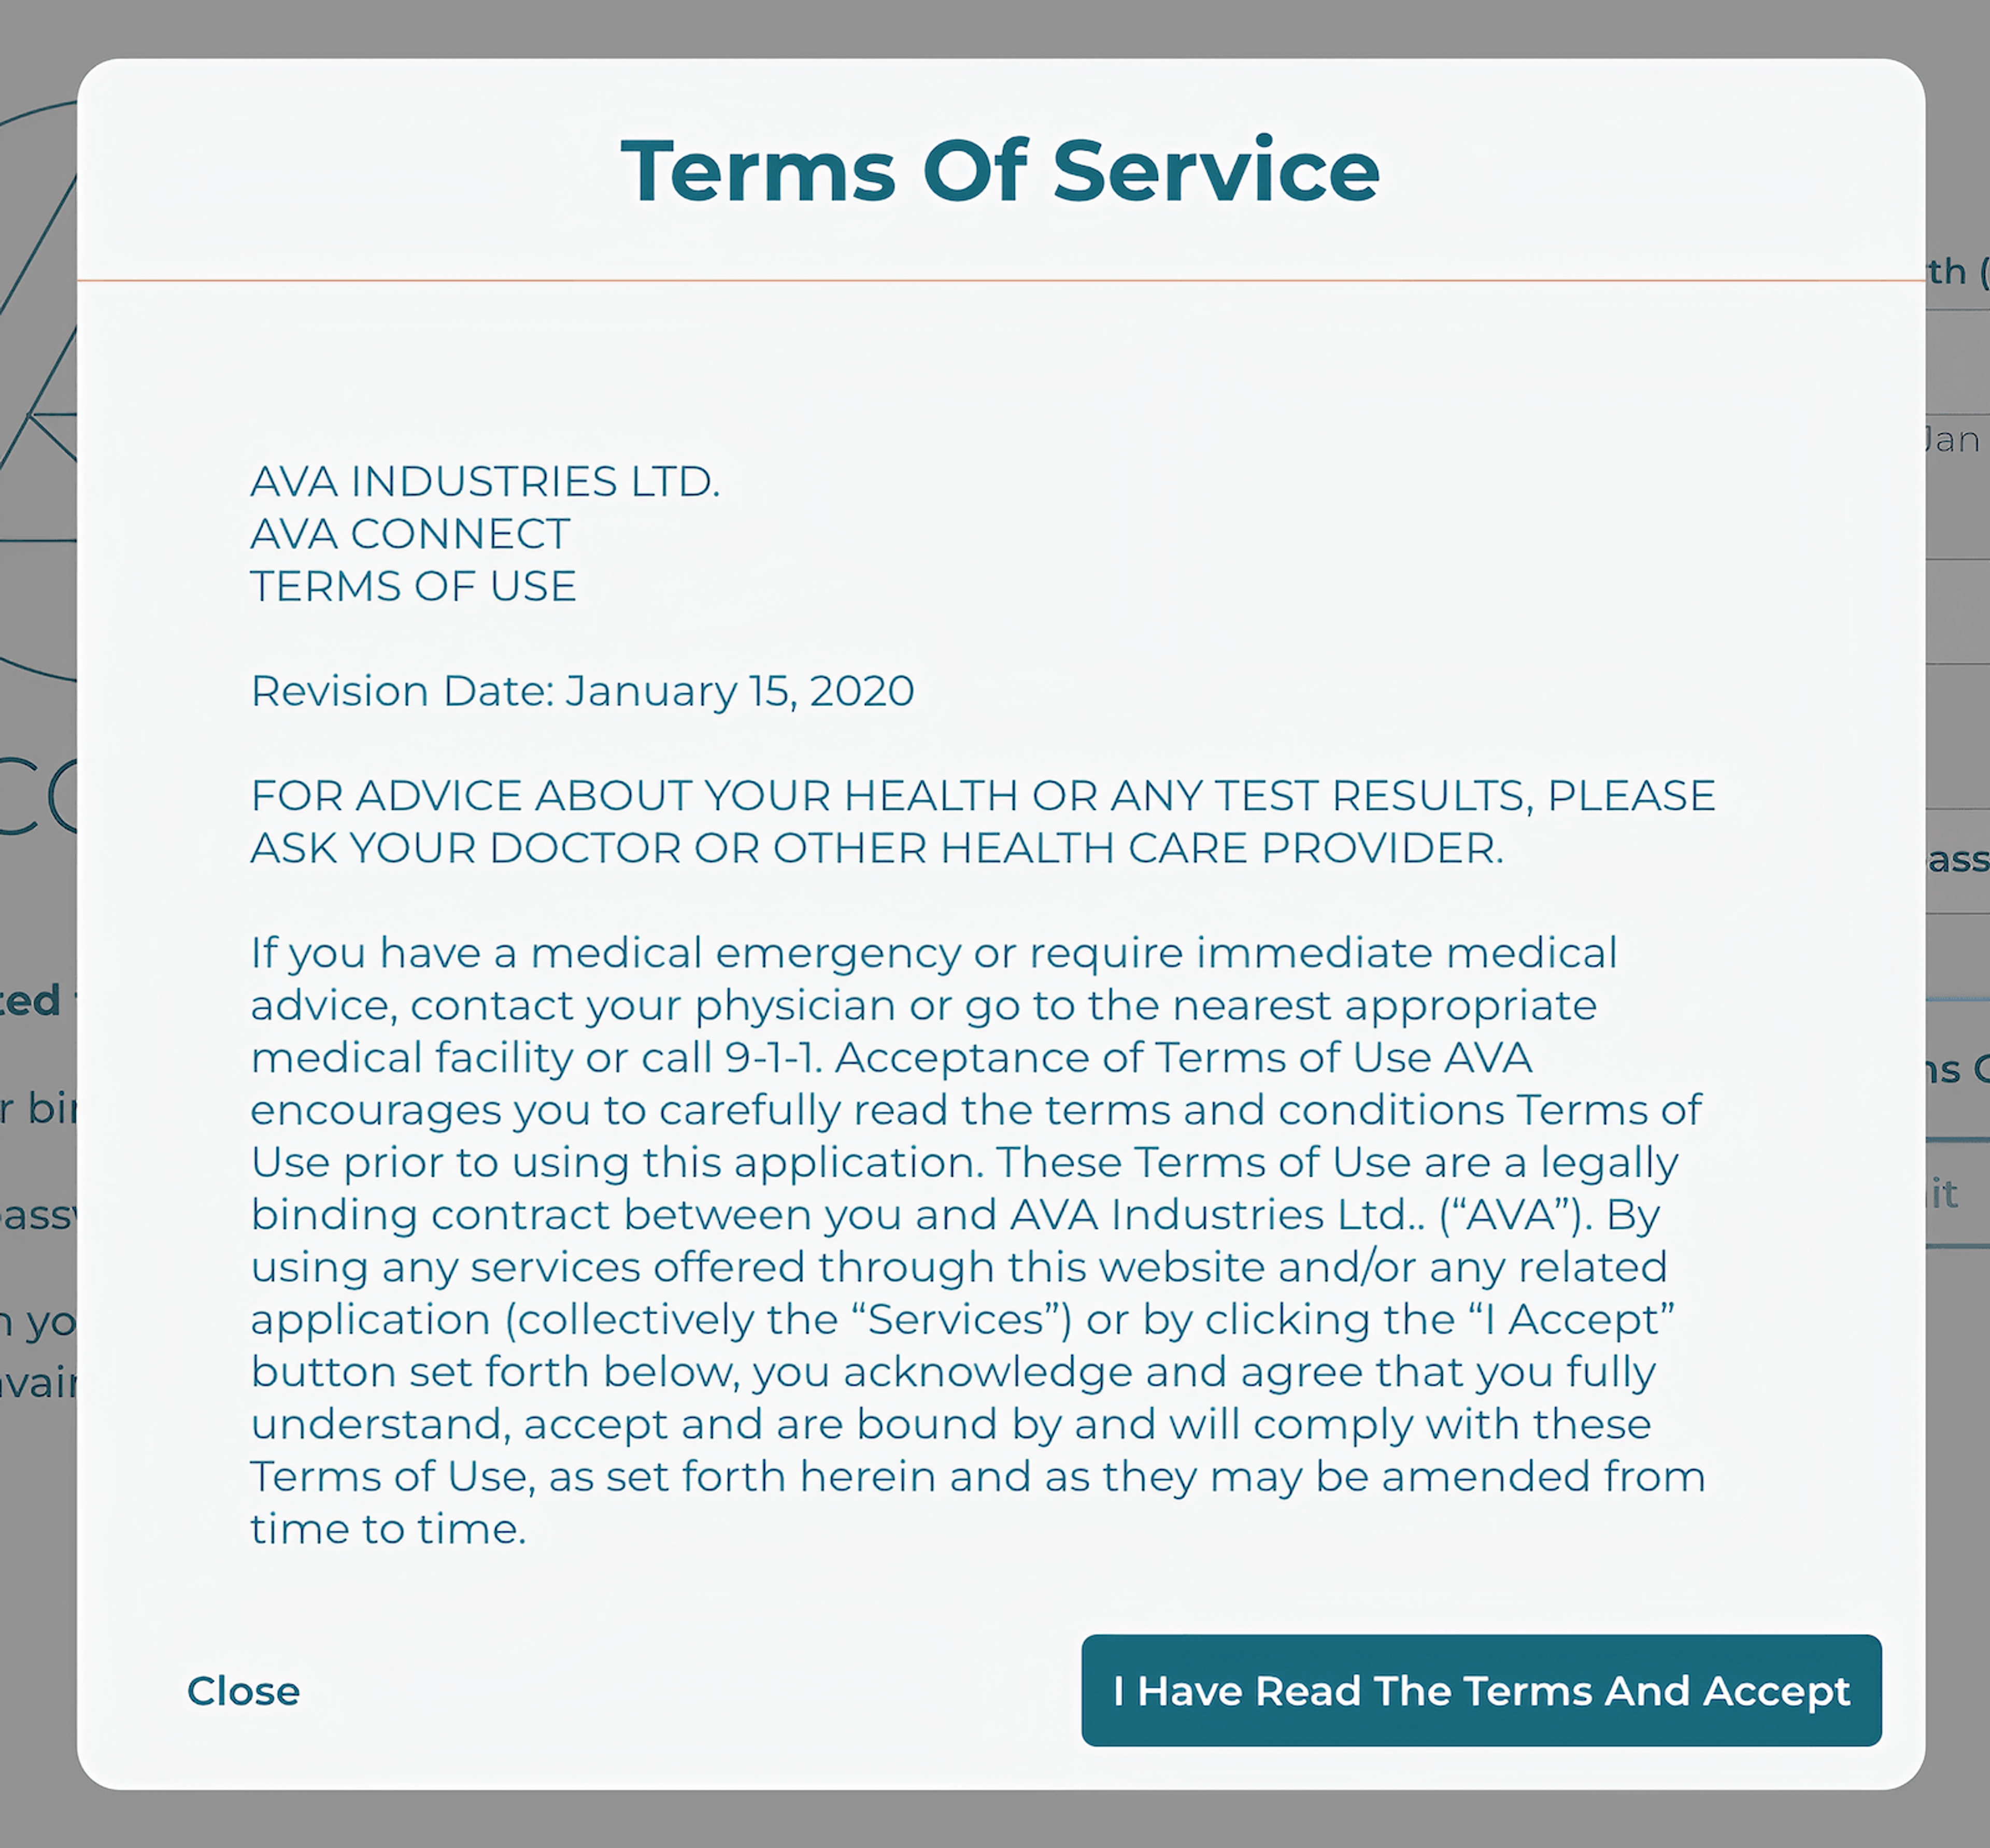 A screenshot of AVA's Terms of Service